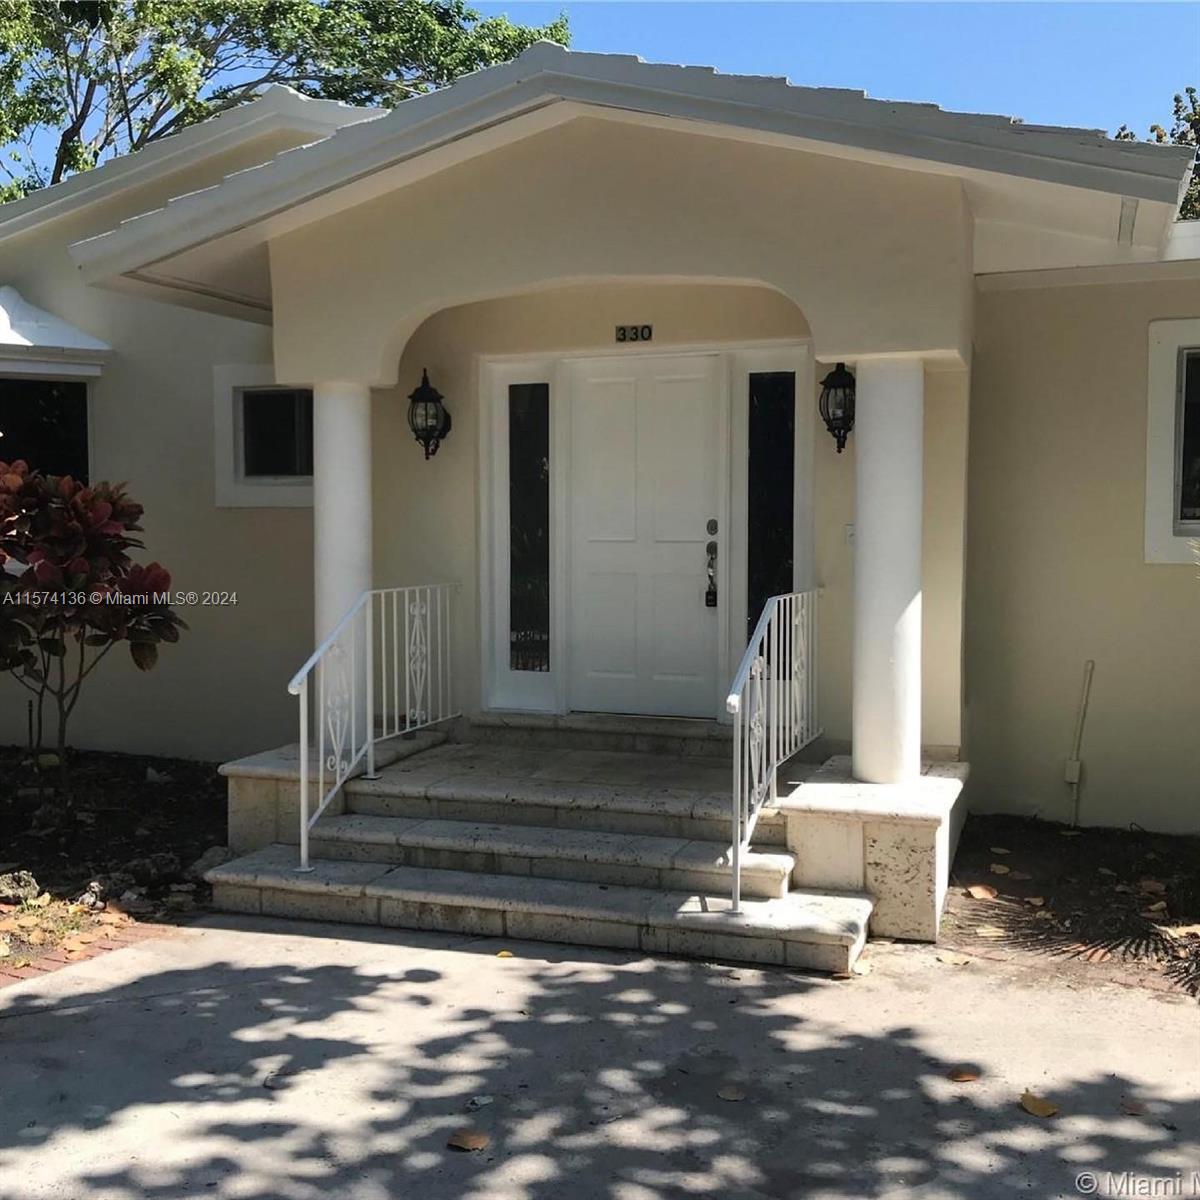 Beautiful 4 bed and 3 bath HOME. Perfect for a family with kids or Investors. It is a great location, in a quiet and safe street. Laundry Area, Terrace, Pool, Garden, Backyard, and Circular Driveway. 7500 ft lot, located on Key Biscayne, Florida, could be your future home, your best investment, or both.

***The home is also for rent MLS A11574147.

***A/C was replaced on September 2023.

*** The Water Heater was replaced in August 2022.

***Easy to show on Locbox go showing assist.